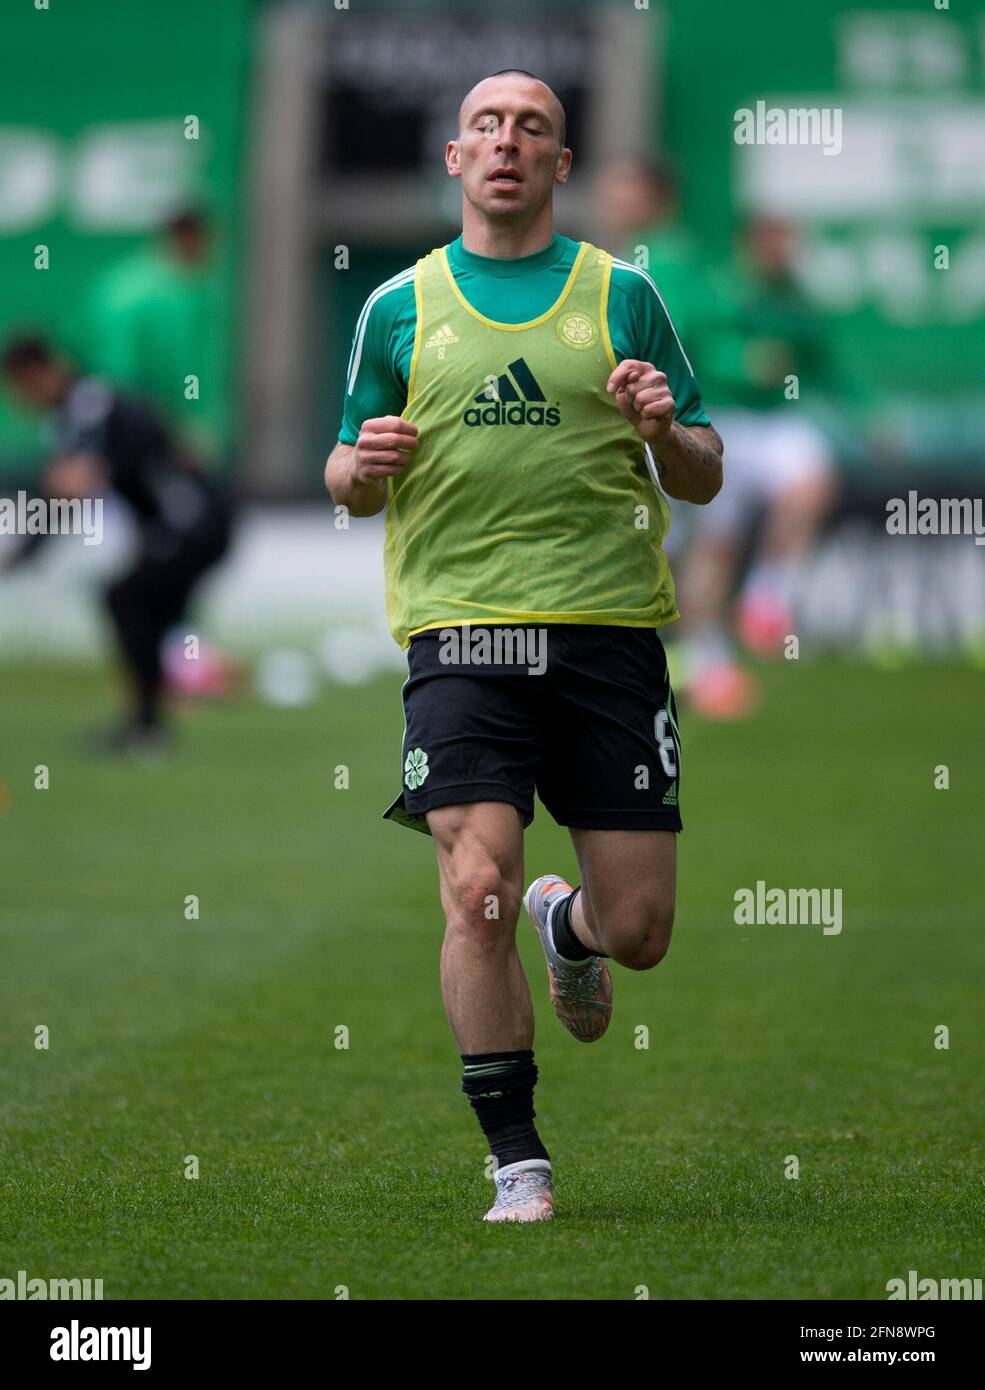 Scottish Premiership - Hibernian v Celtic. Easter Road Stadium, Edinburgh, Midlothian, UK. 15th May, 2021. Hibs play host to Celtic in the Scottish Premier League at Easter road, Edinburgh. Pic shows: Celtic midfielder, Scott Brown, warms up before playing his final game for the Parkhead side after 14 years. Credit: Ian Jacobs/Alamy Live News Stock Photo